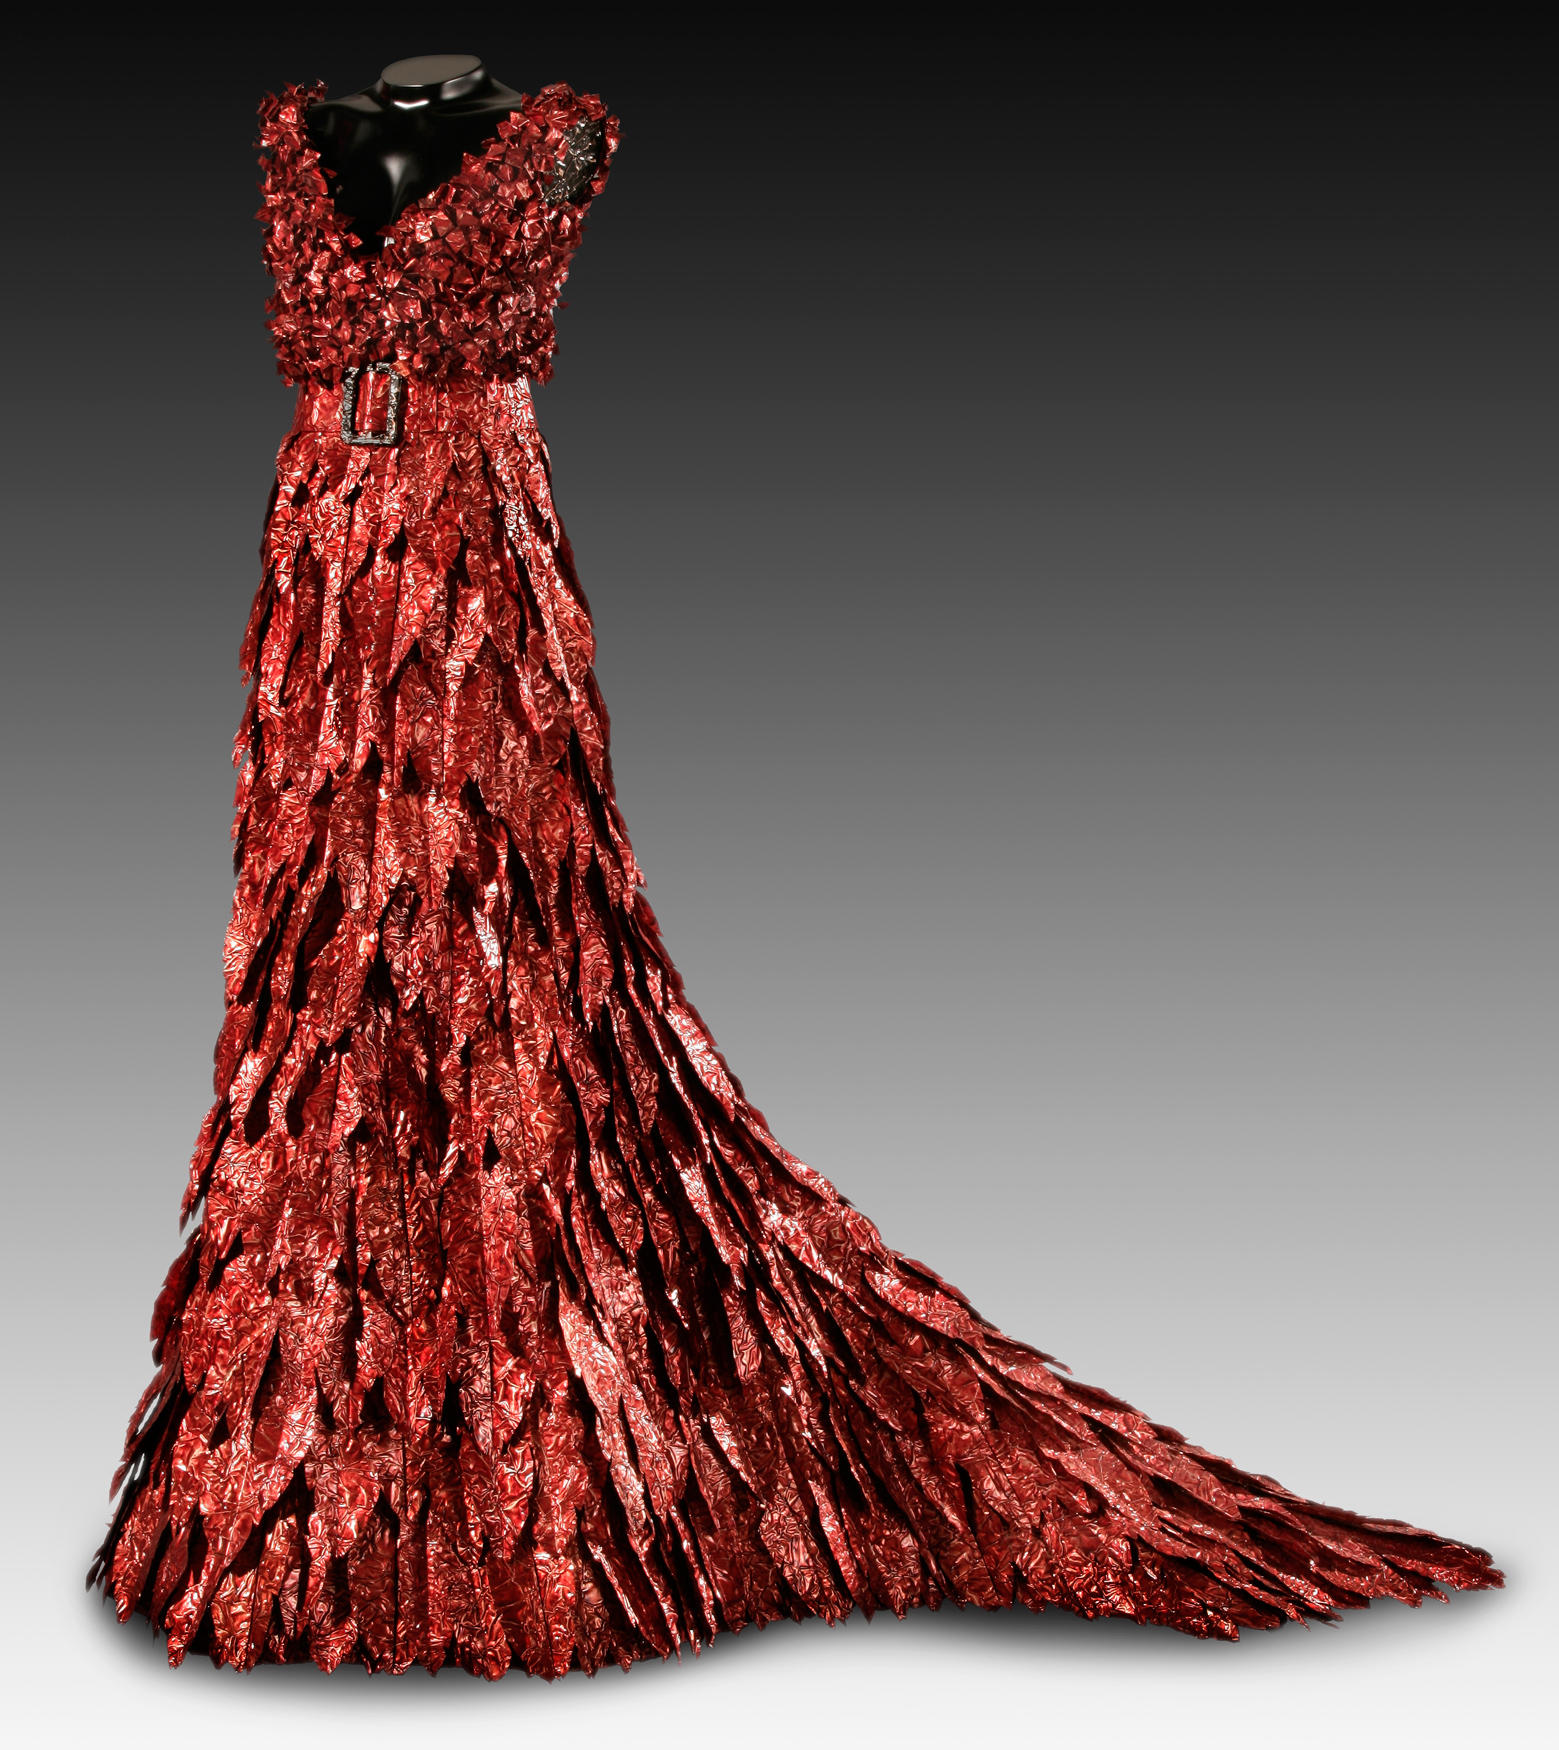 "Genevieve" - 
74" Tall - Red Patina on Textured Copper